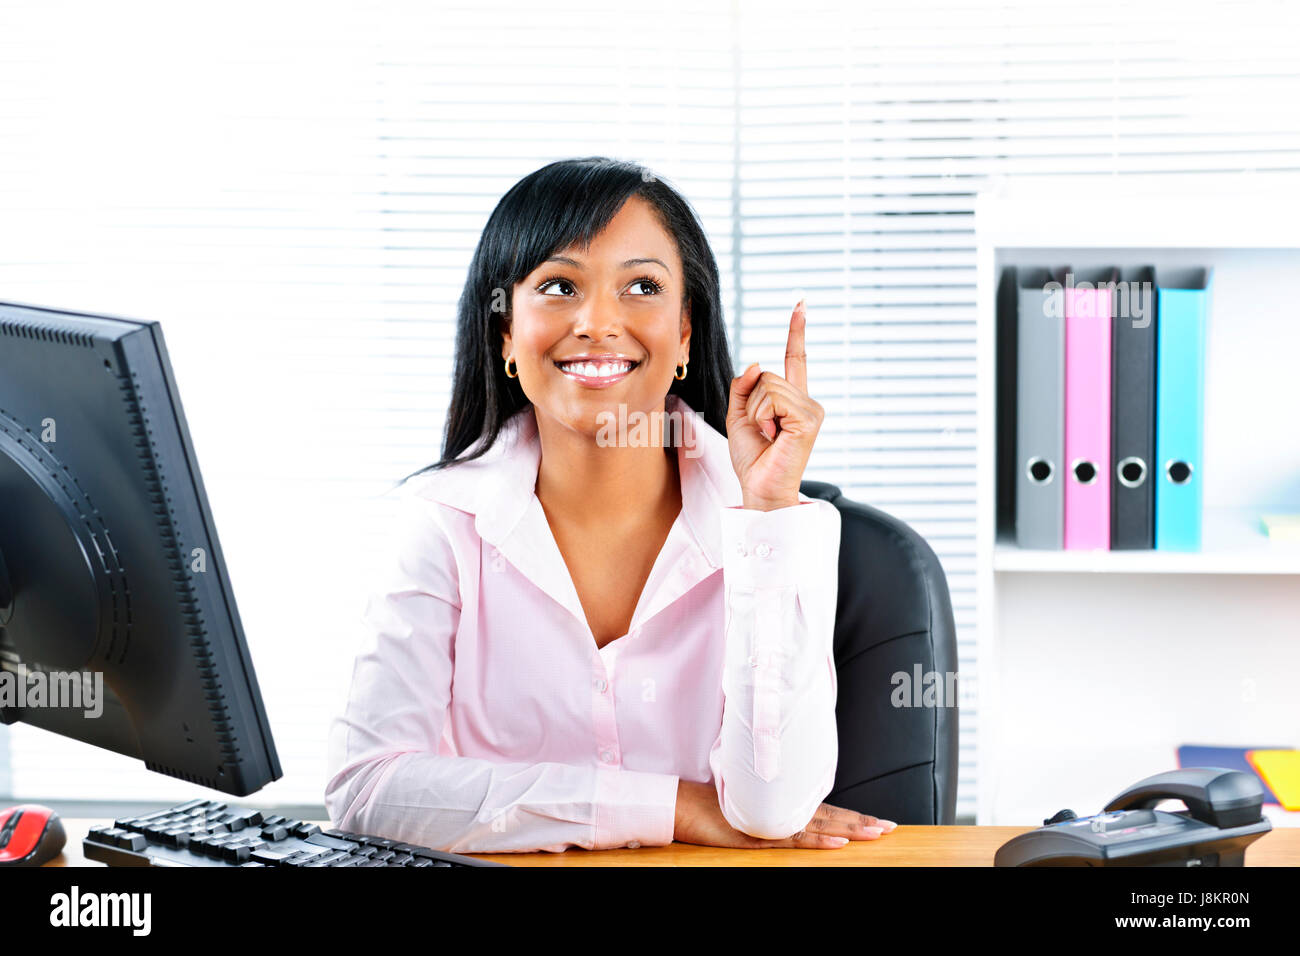 woman, gesture, laugh, laughs, laughing, twit, giggle, smile, smiling, Stock Photo